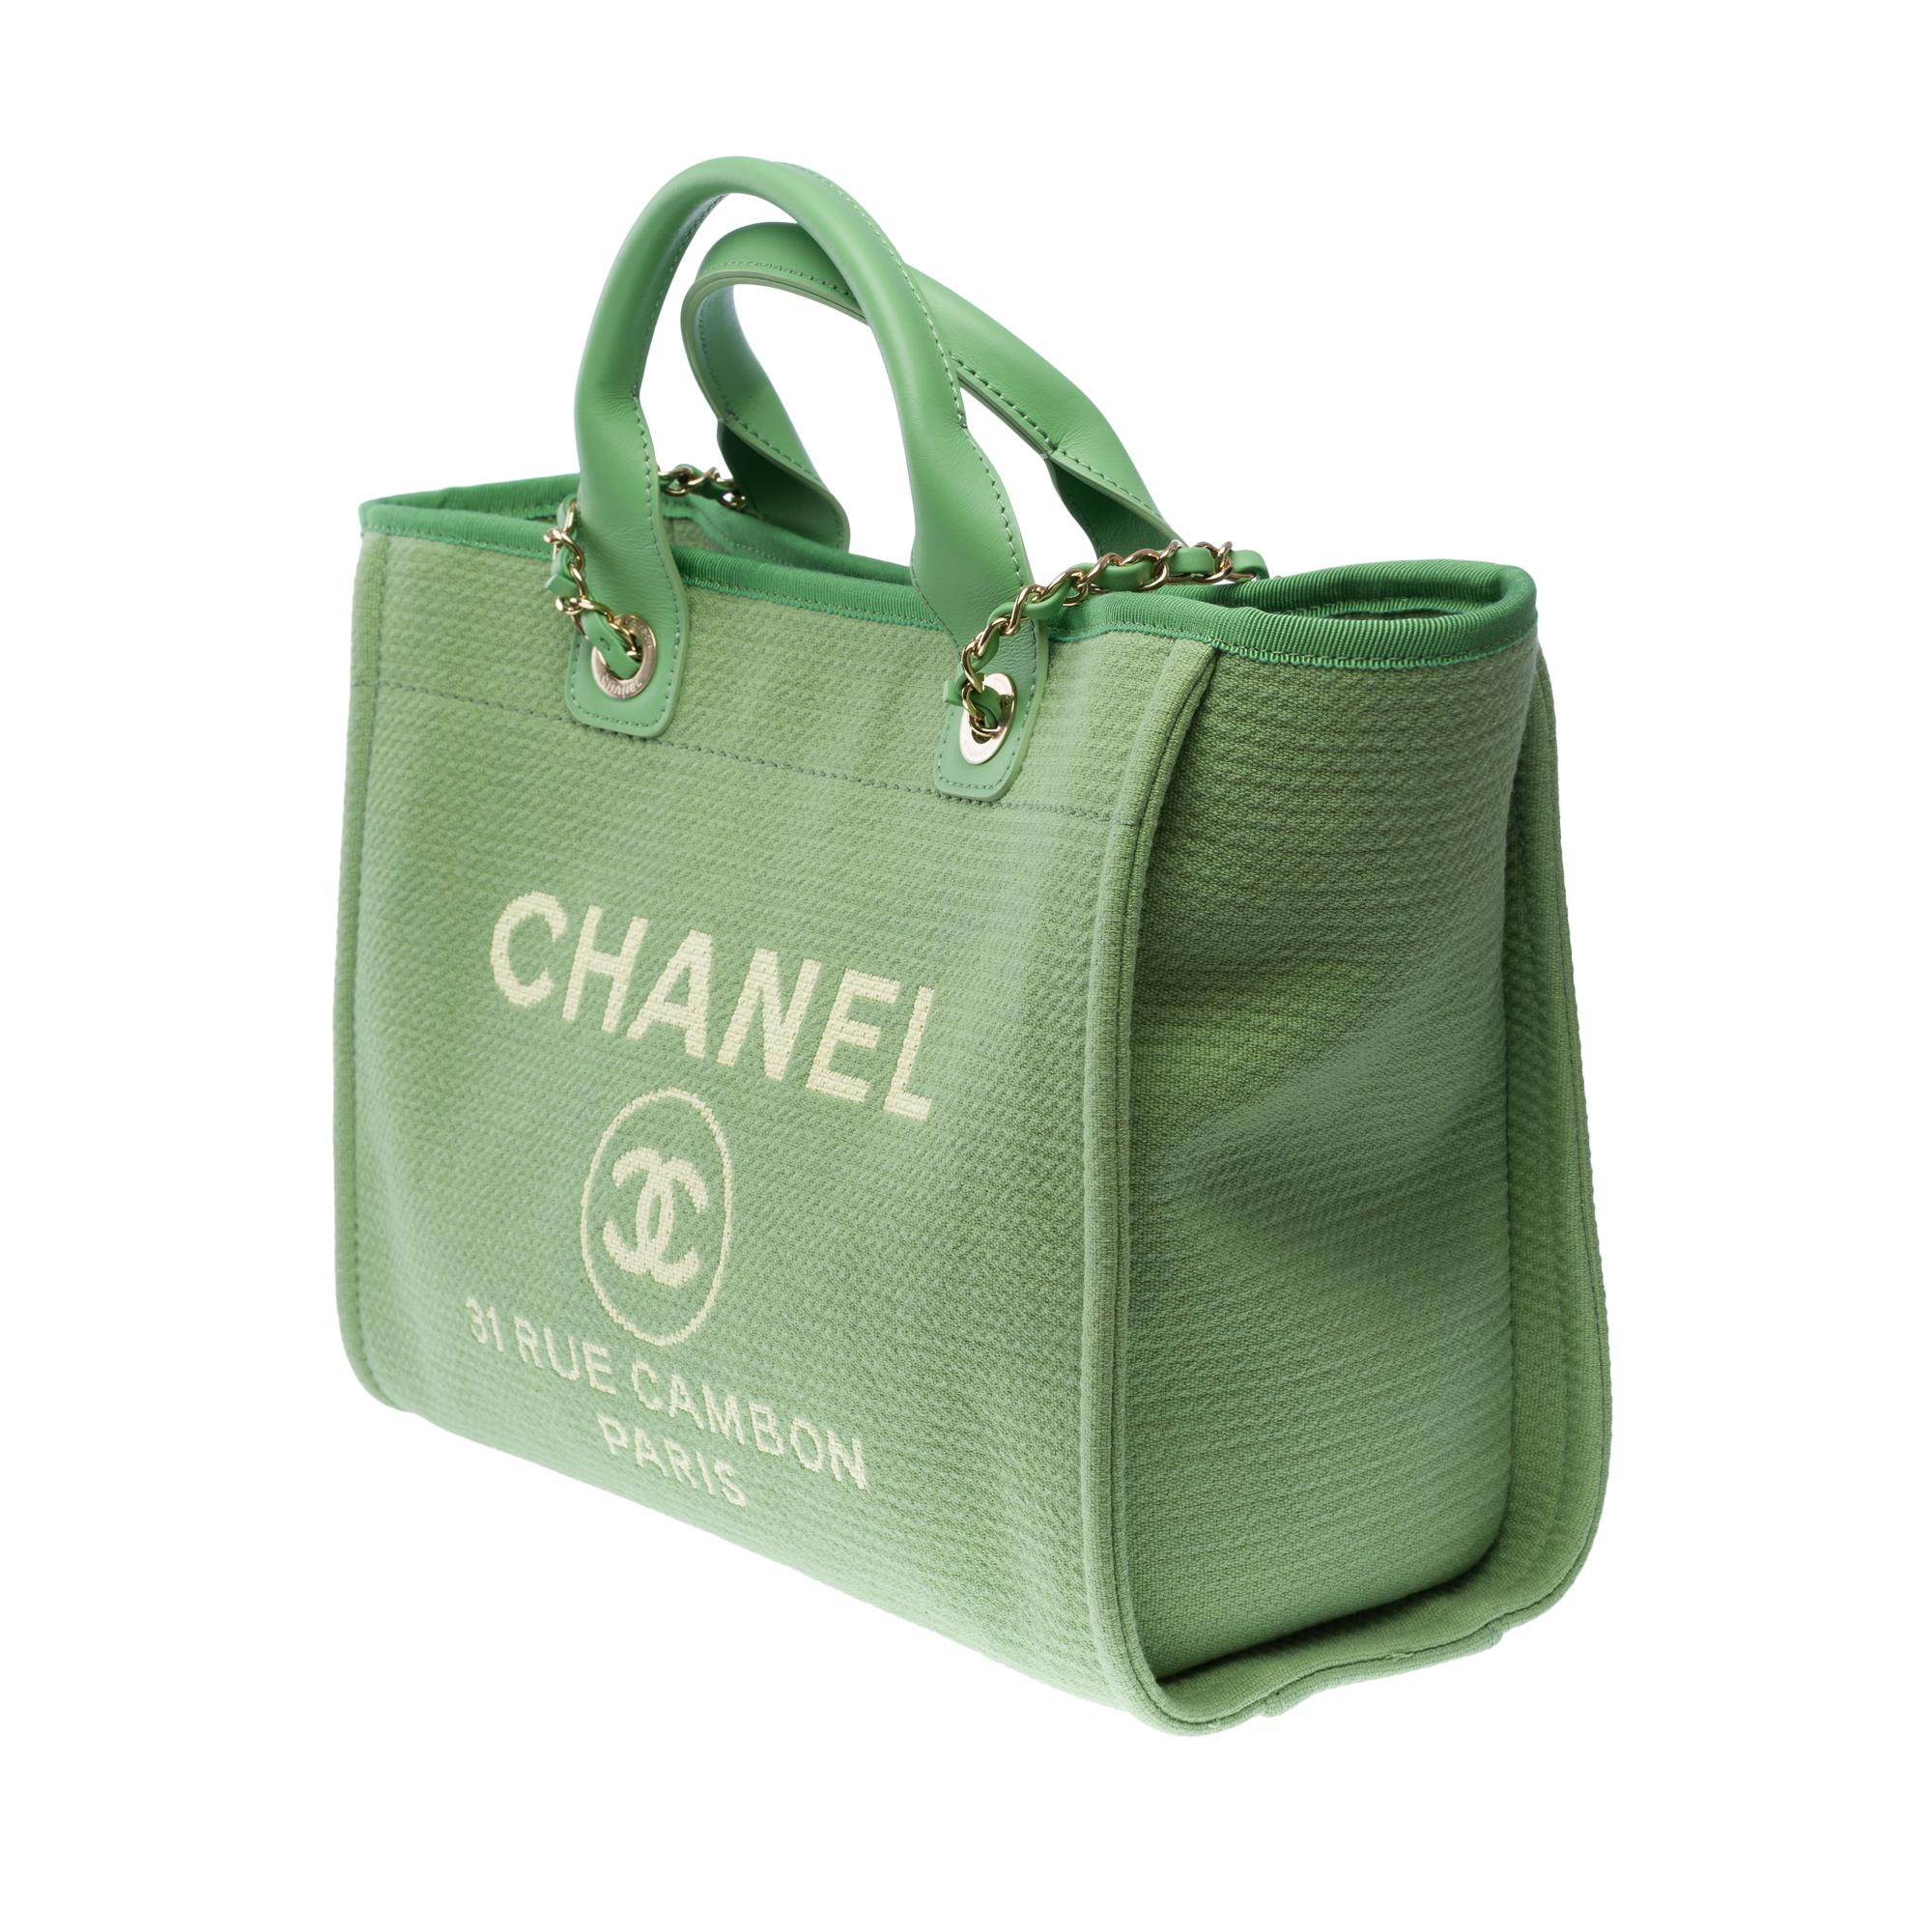 New Amazing limited edition Chanel Deauville Tote bag in Green canvas, SHW For Sale 1